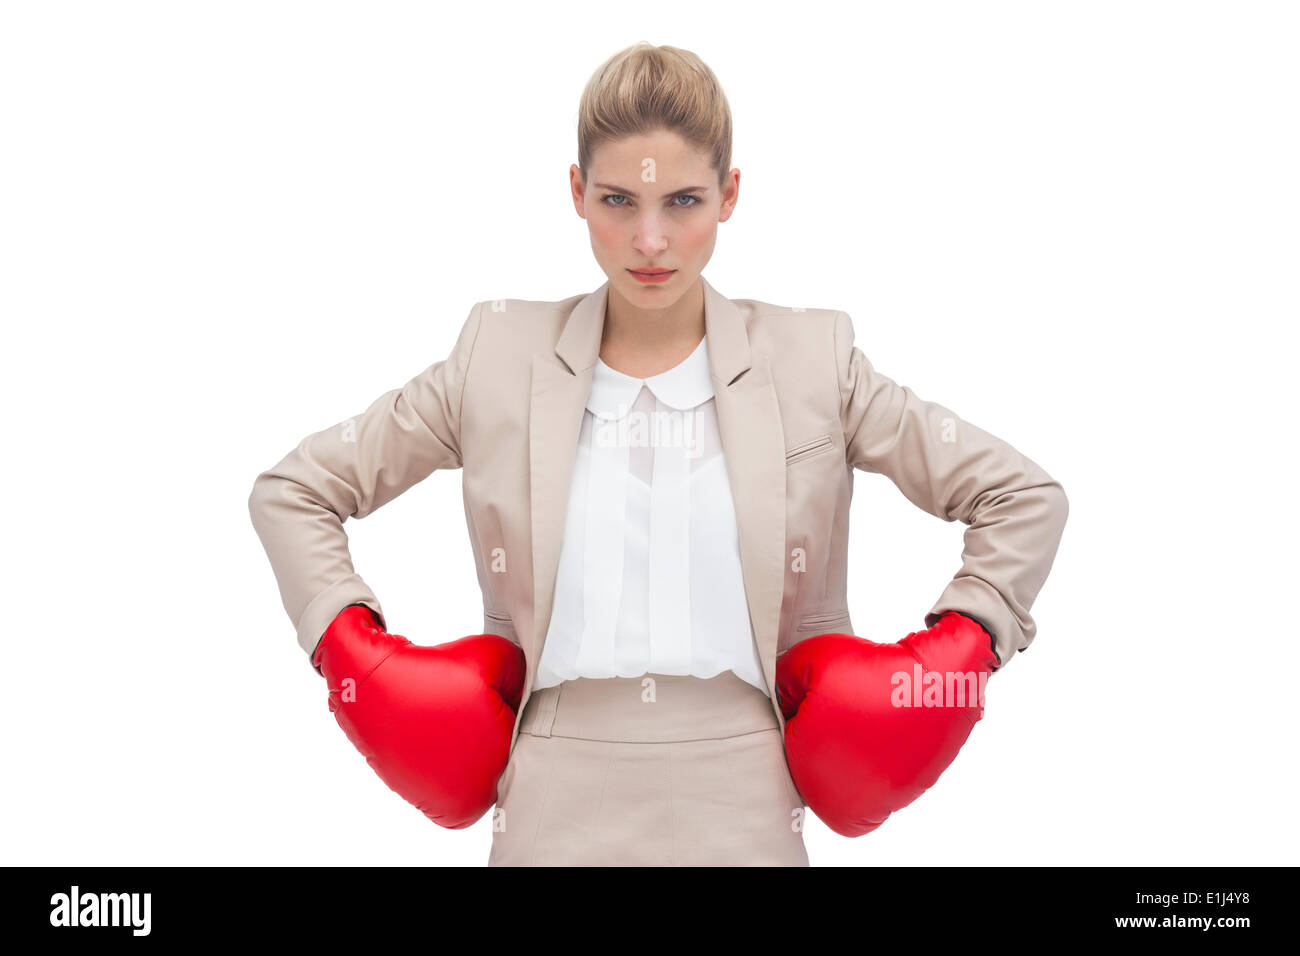 Determined businesswoman with boxing gloves Stock Photo